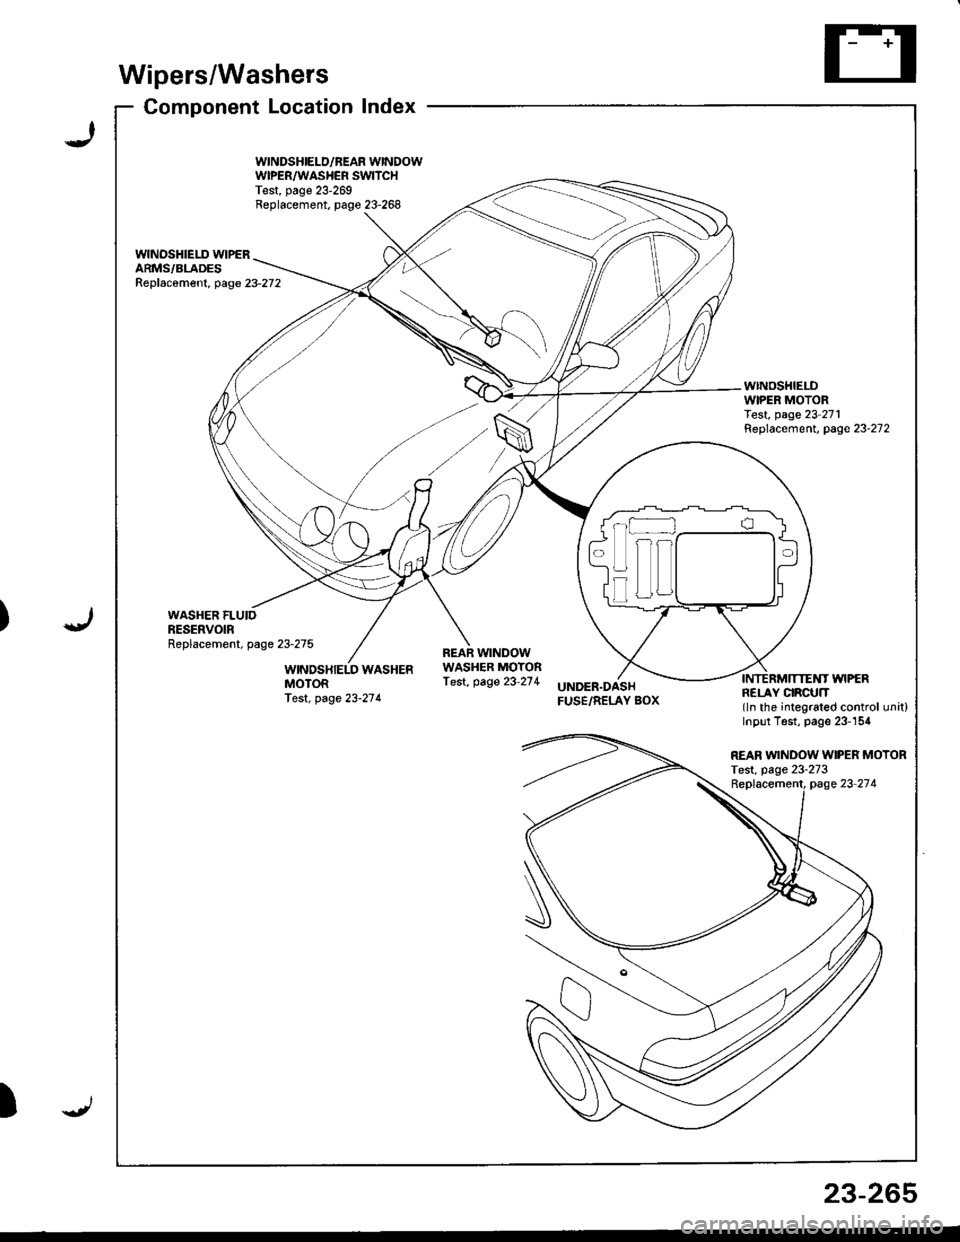 HONDA INTEGRA 1998 4.G Workshop Manual )
Wipers/Washers
Component Locationlndex
WINDSHIELD/BEAR WINDOWWIPER/WASHER SWITCHTest, page 23-269Replacement. page 23-268
wlNOSHIELD WIPERARMS/BLADESReplac6ment, page23-272
WINDSHIELDWIPER MOTORTest